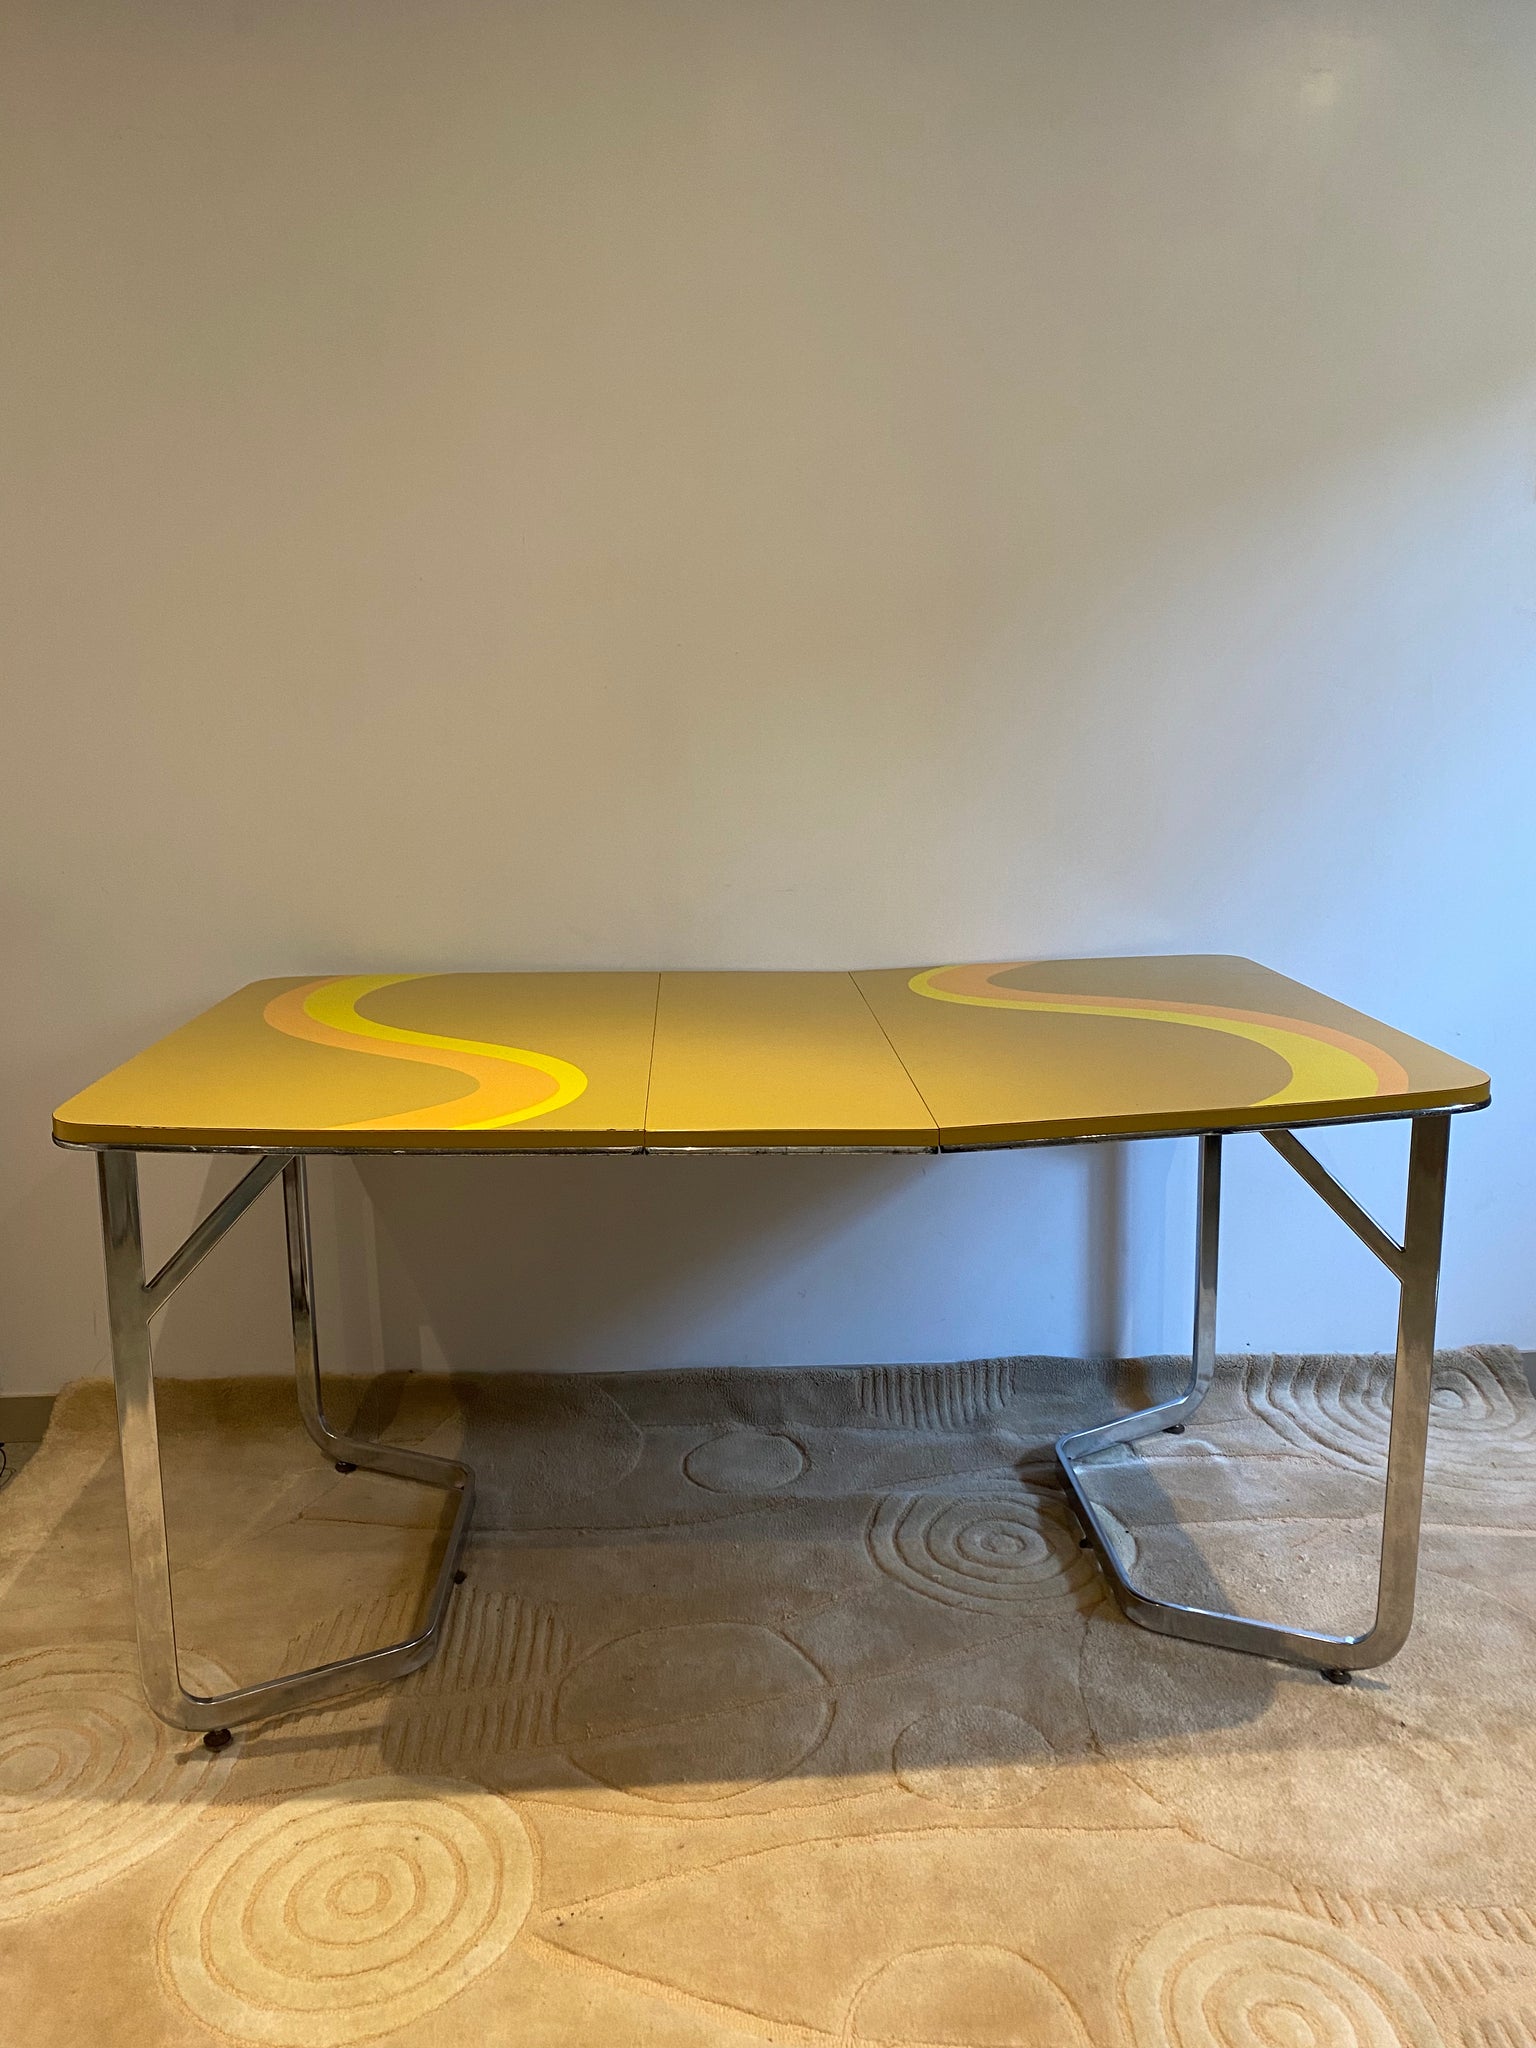 Groovy retro green dining table